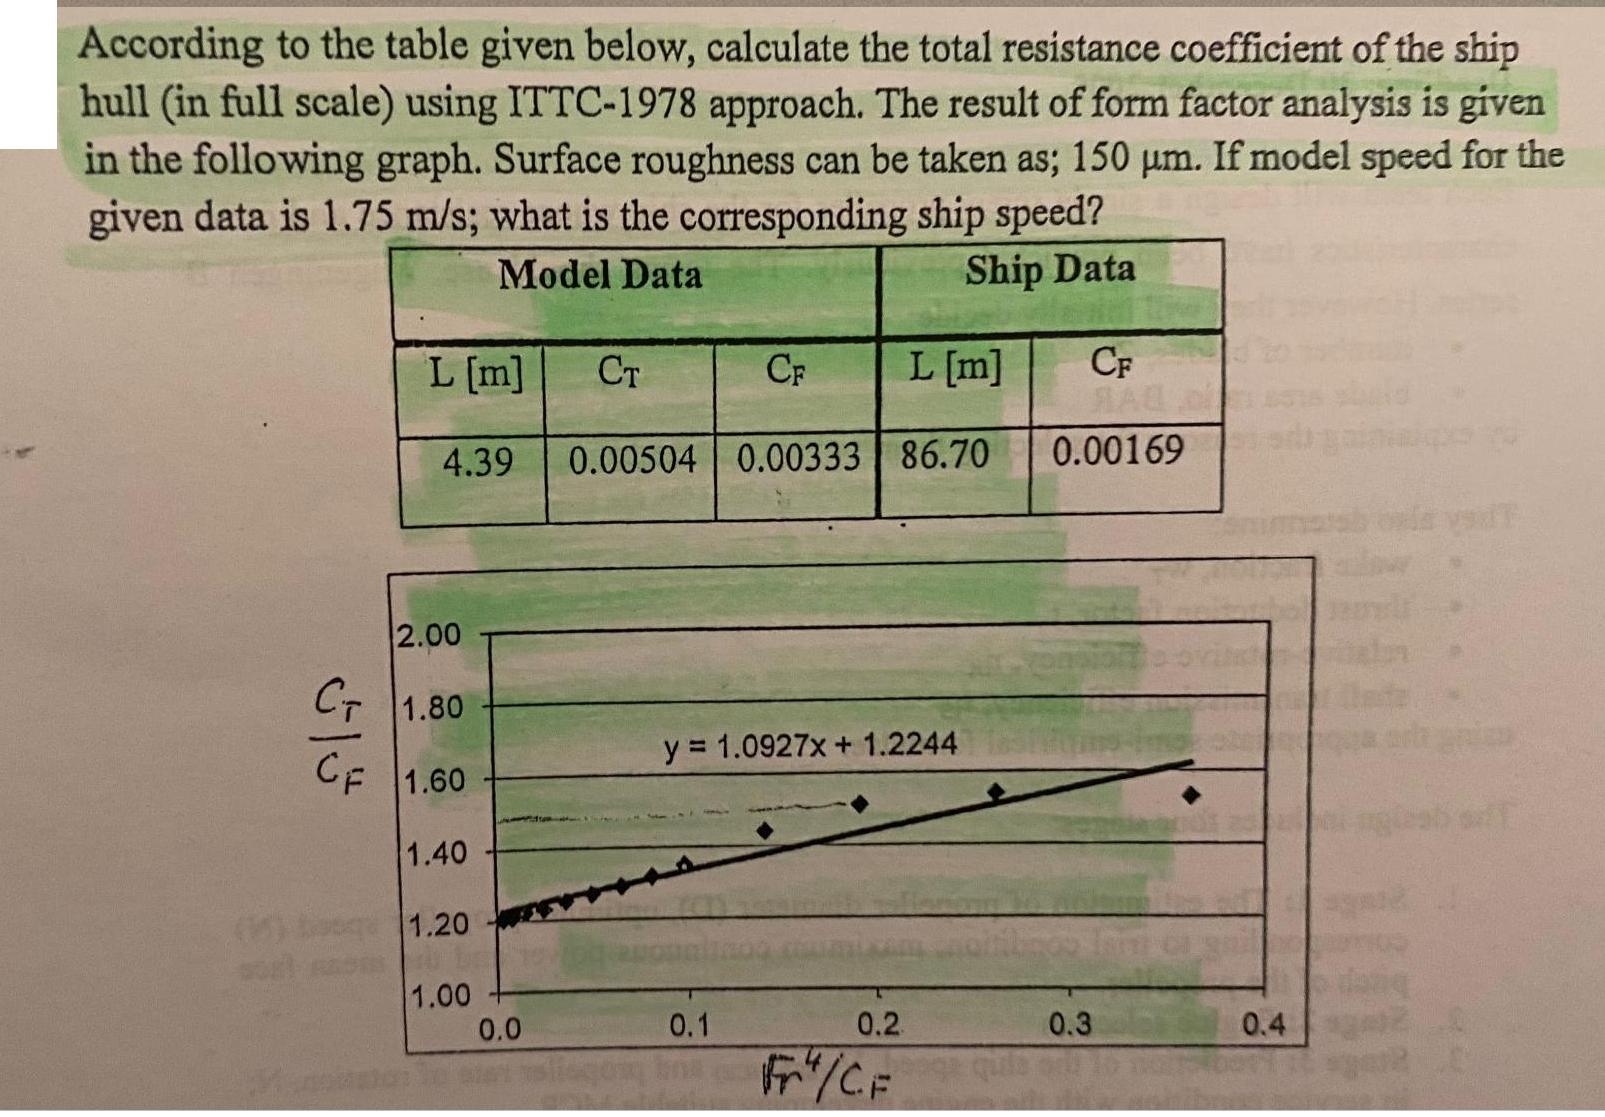 According to the table given below, calculate the total resistance coefficient of the ship hull (in full